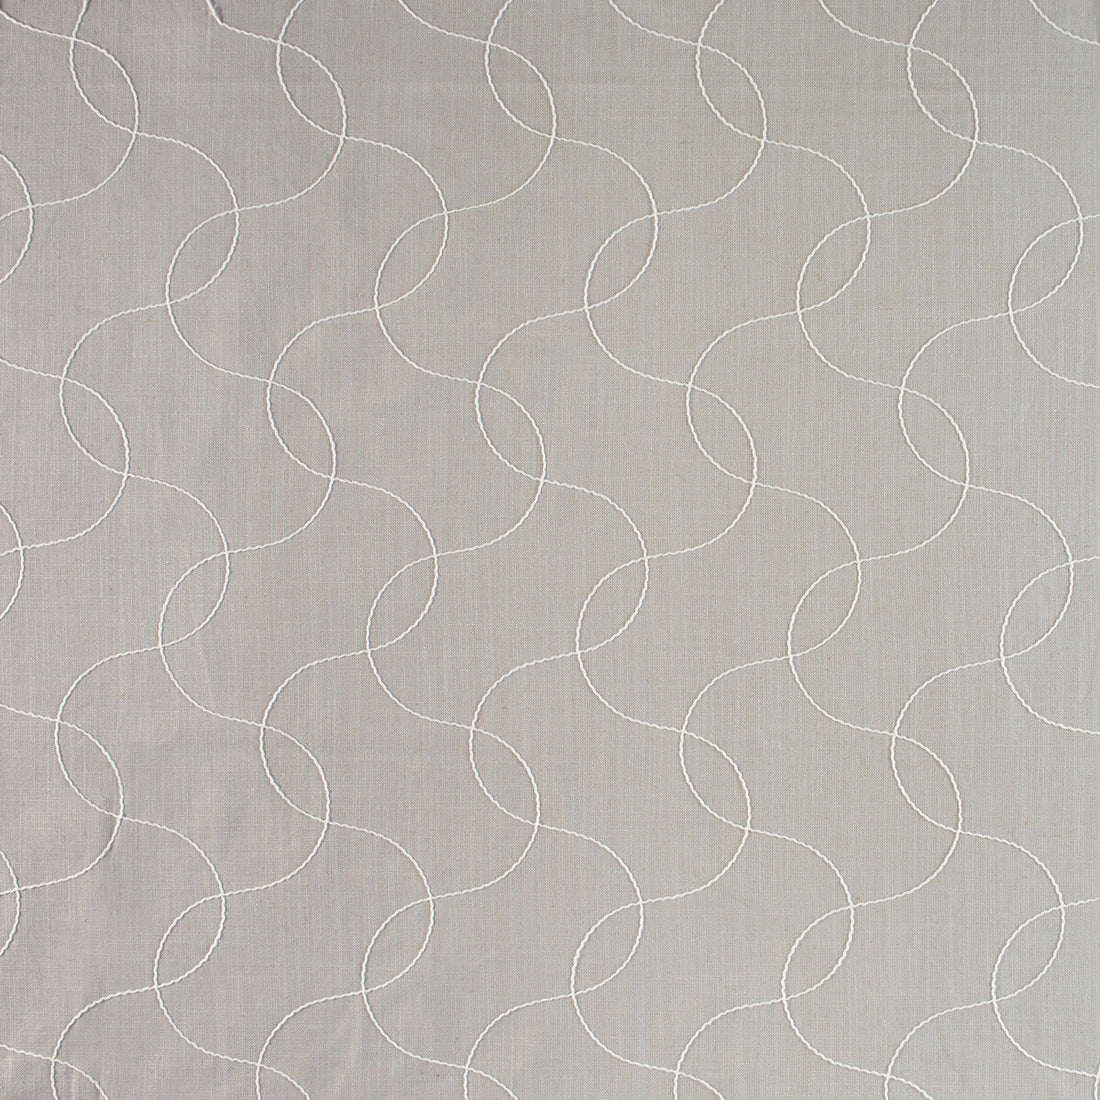 Awander fabric in pearl grey color - pattern 35898.11.0 - by Kravet Design in the Barbara Barry Home Midsummer collection